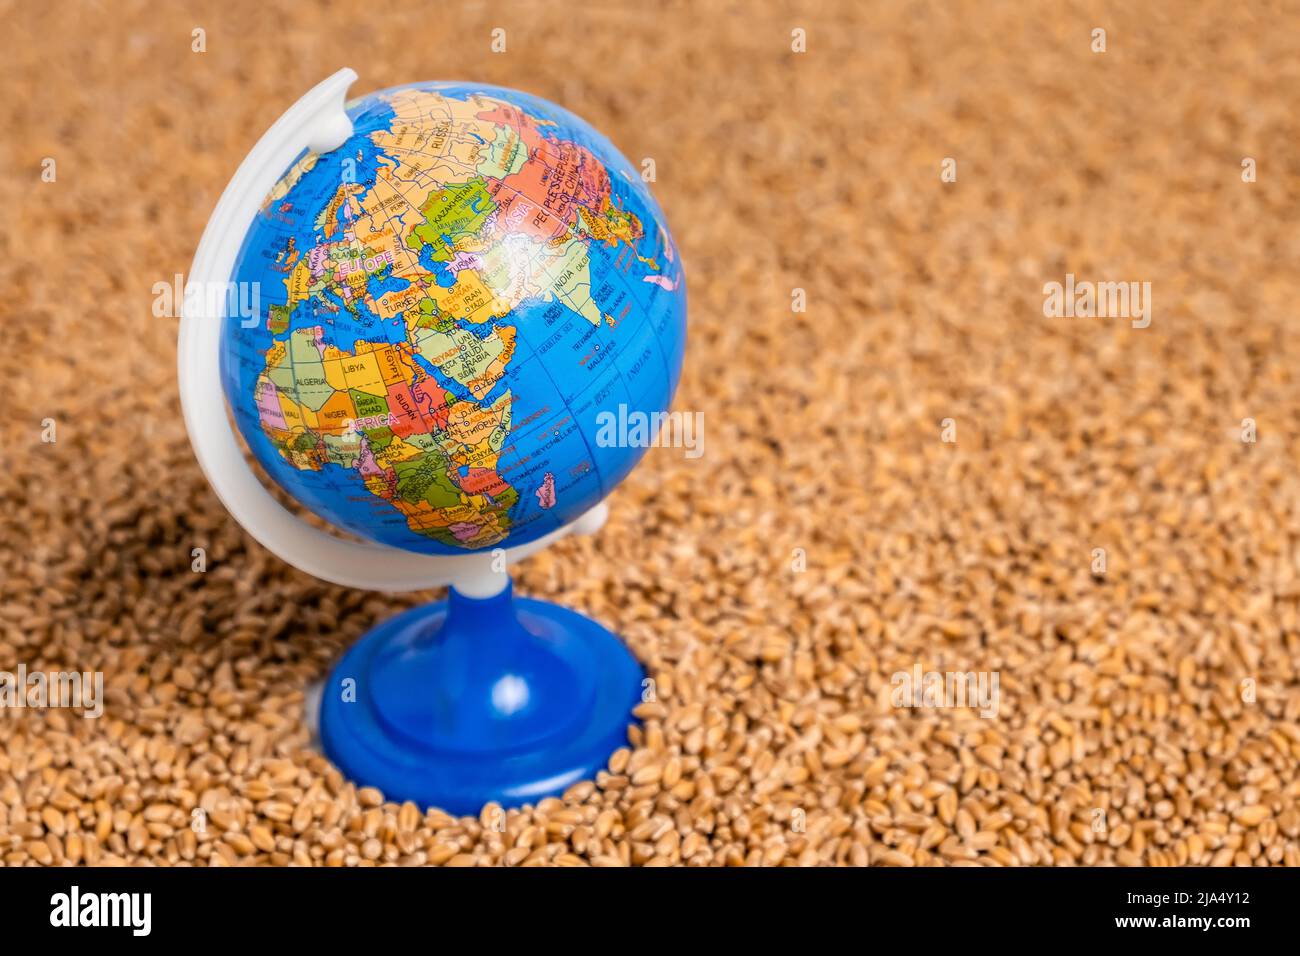 World globe on wheat grain pile as background. Concept of food shortage, grain supply crisis and global food scarcity Stock Photo